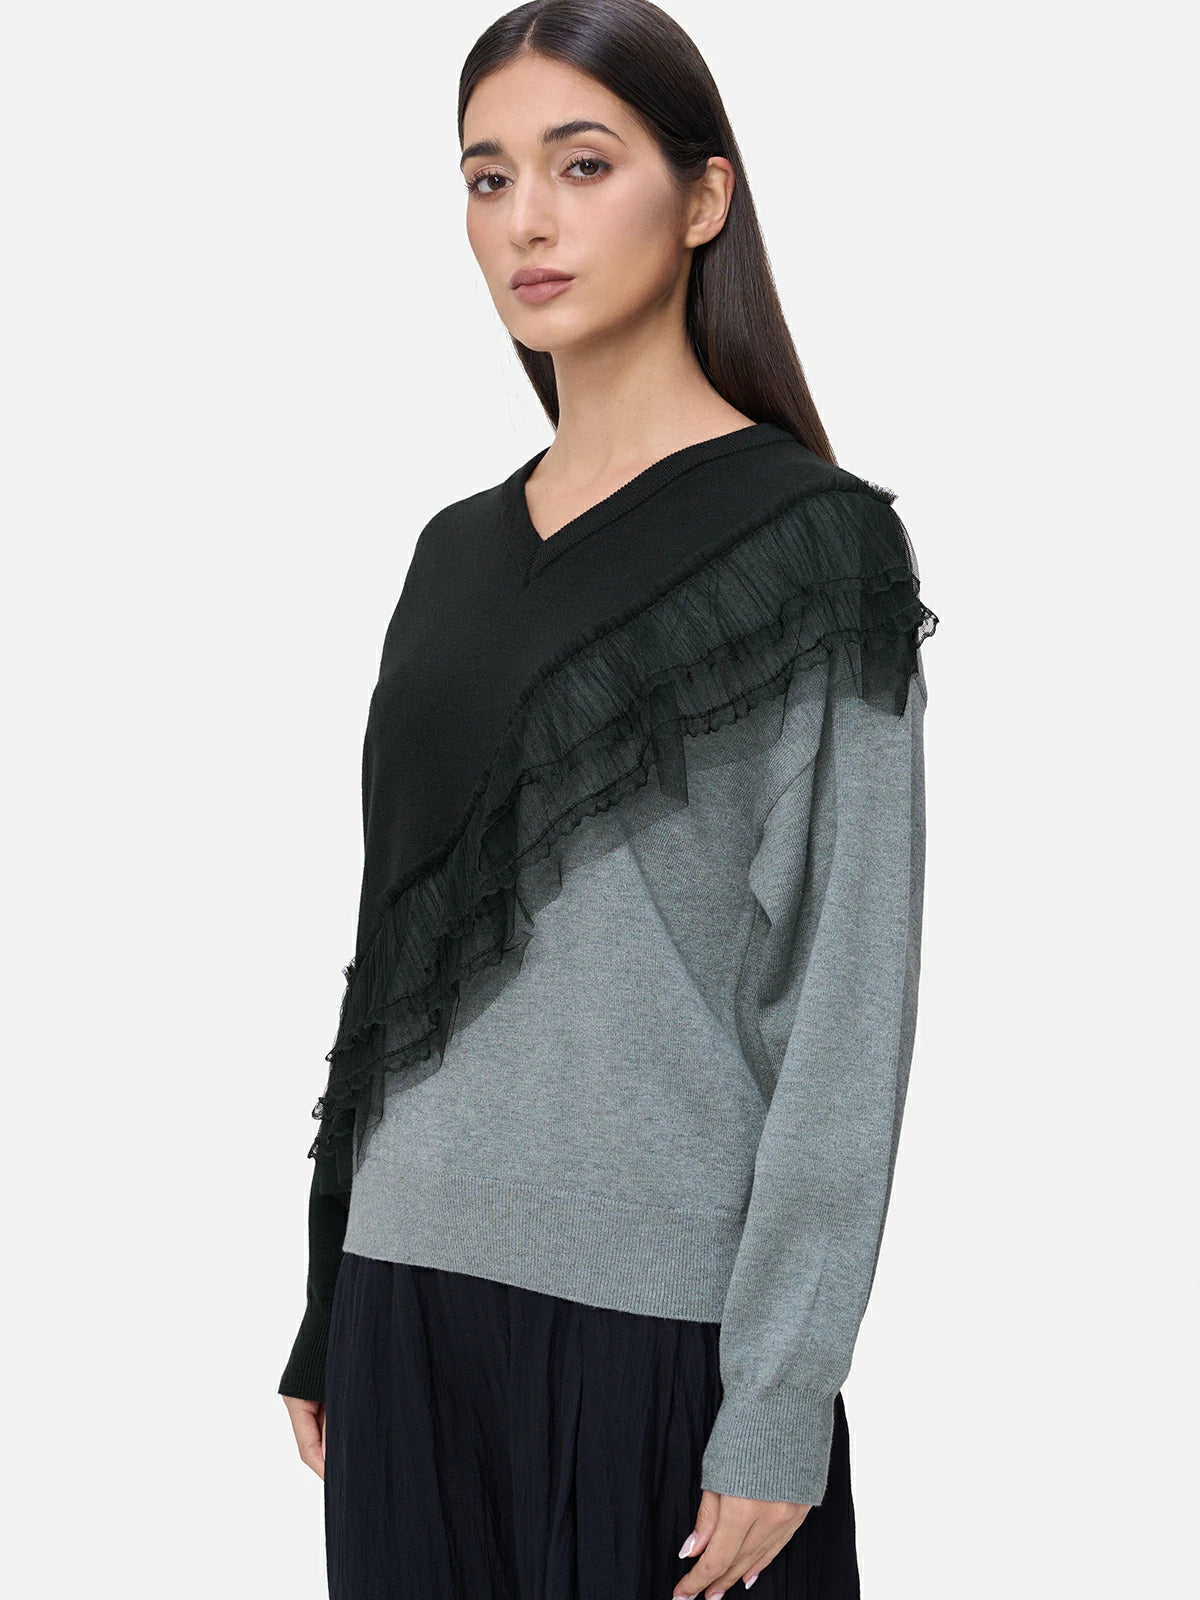 Elevate your wardrobe with this chic round neck sweater, featuring a sophisticated black and gray color-blocked design and delicate lace chiffon detailing for an effortlessly stylish look.